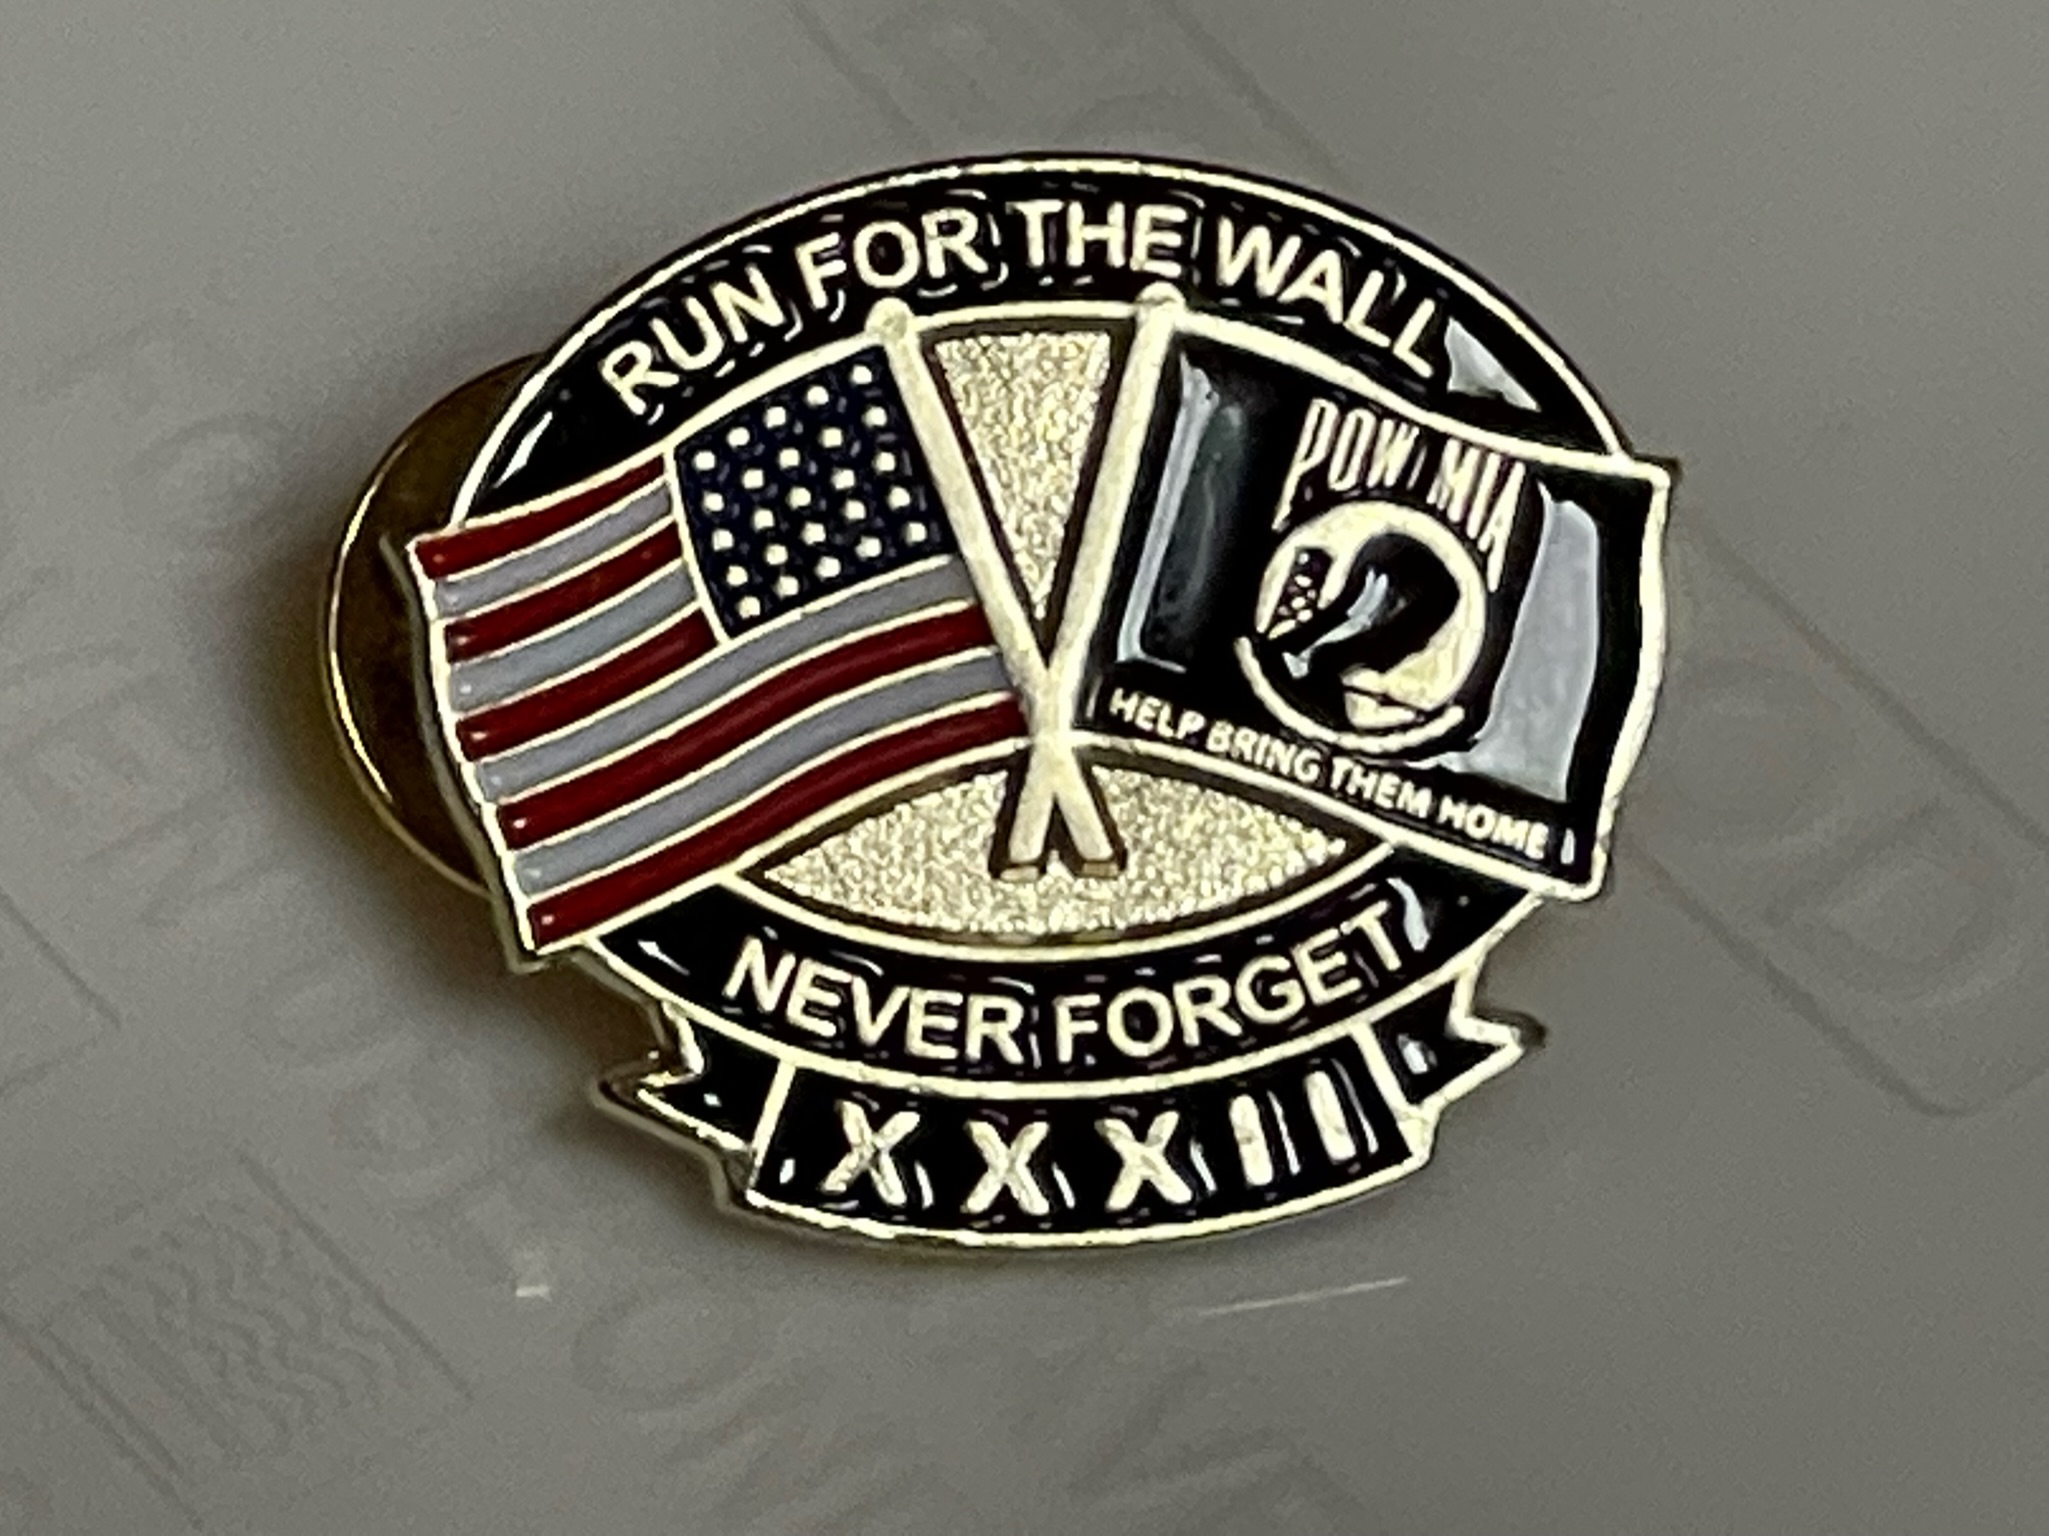 Day Ride Supports Veterans via the “Run for the Wall” and the “Ride to Remember”